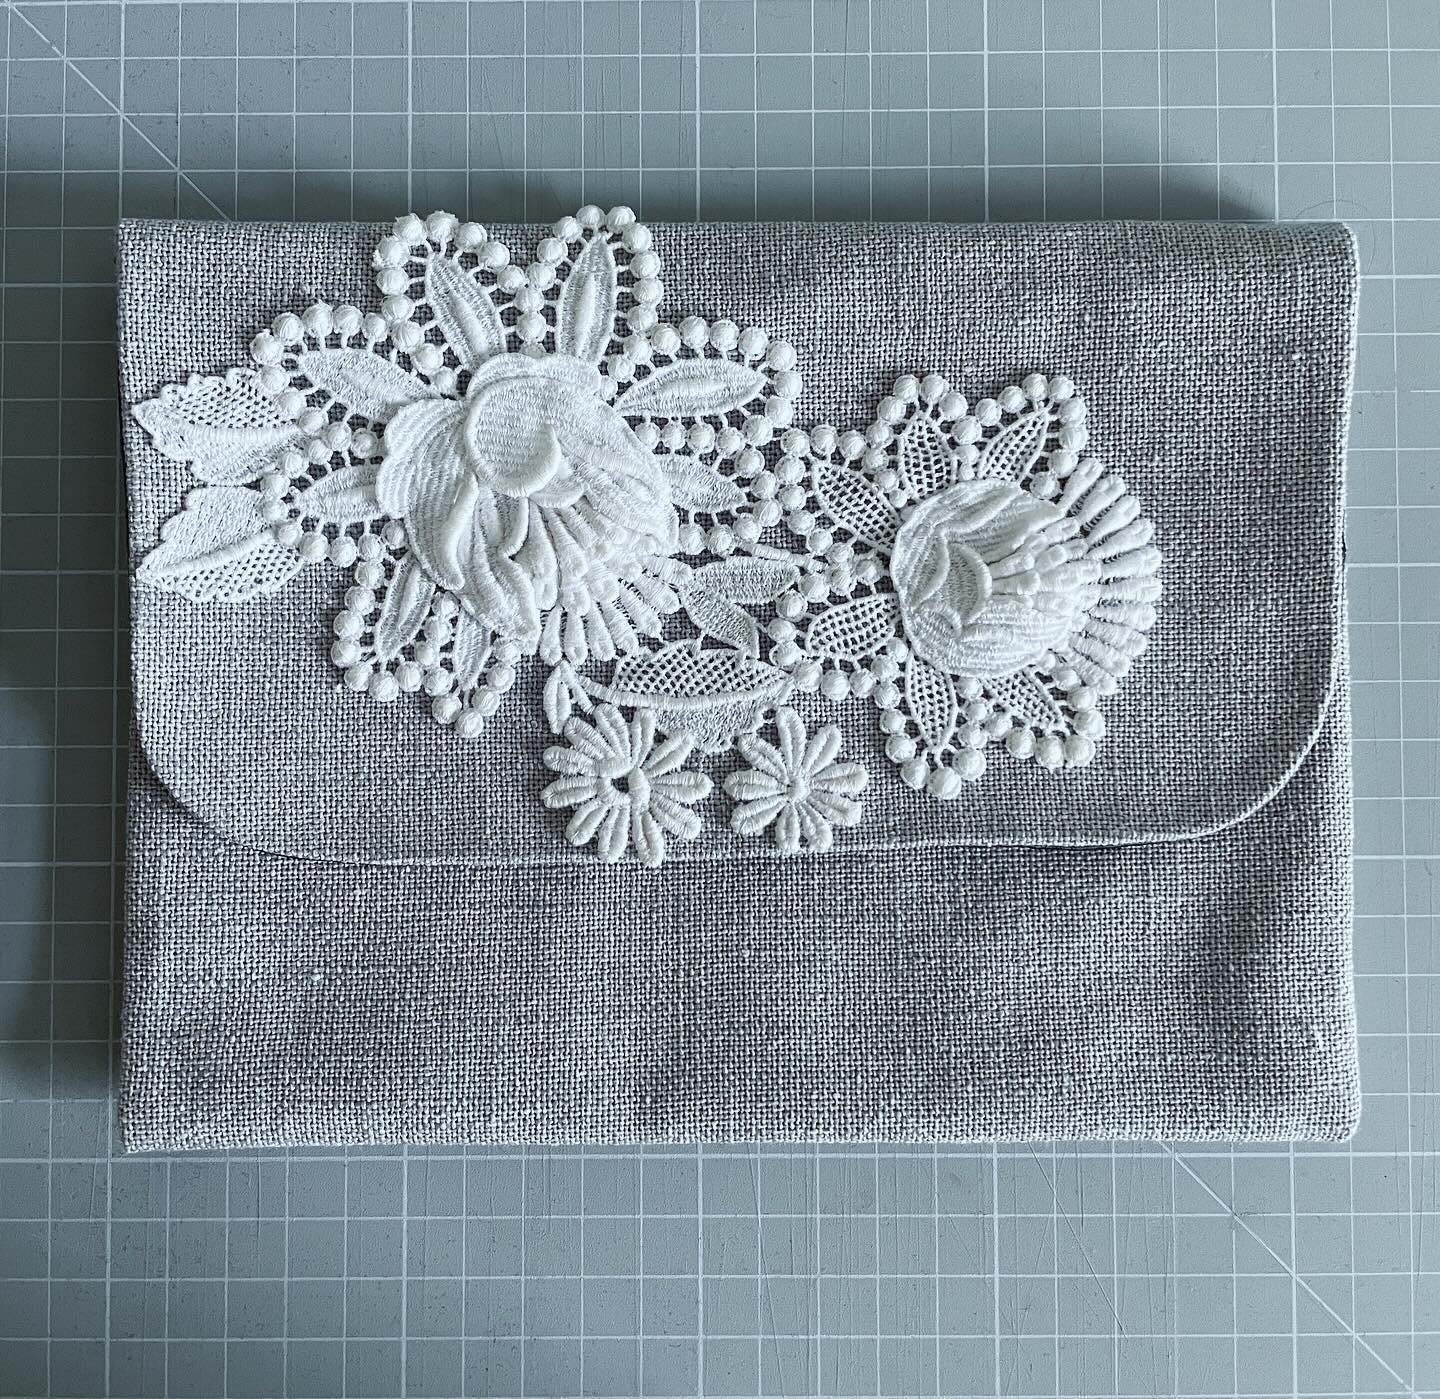 I made a little fold over clutch bag from silver grey linen featuring some vintage lace I rescued from a very tired dress a while ago. Big enough for a phone, a purse and a lippy. What more do you need?! #madebyme #fabriclove #vintage